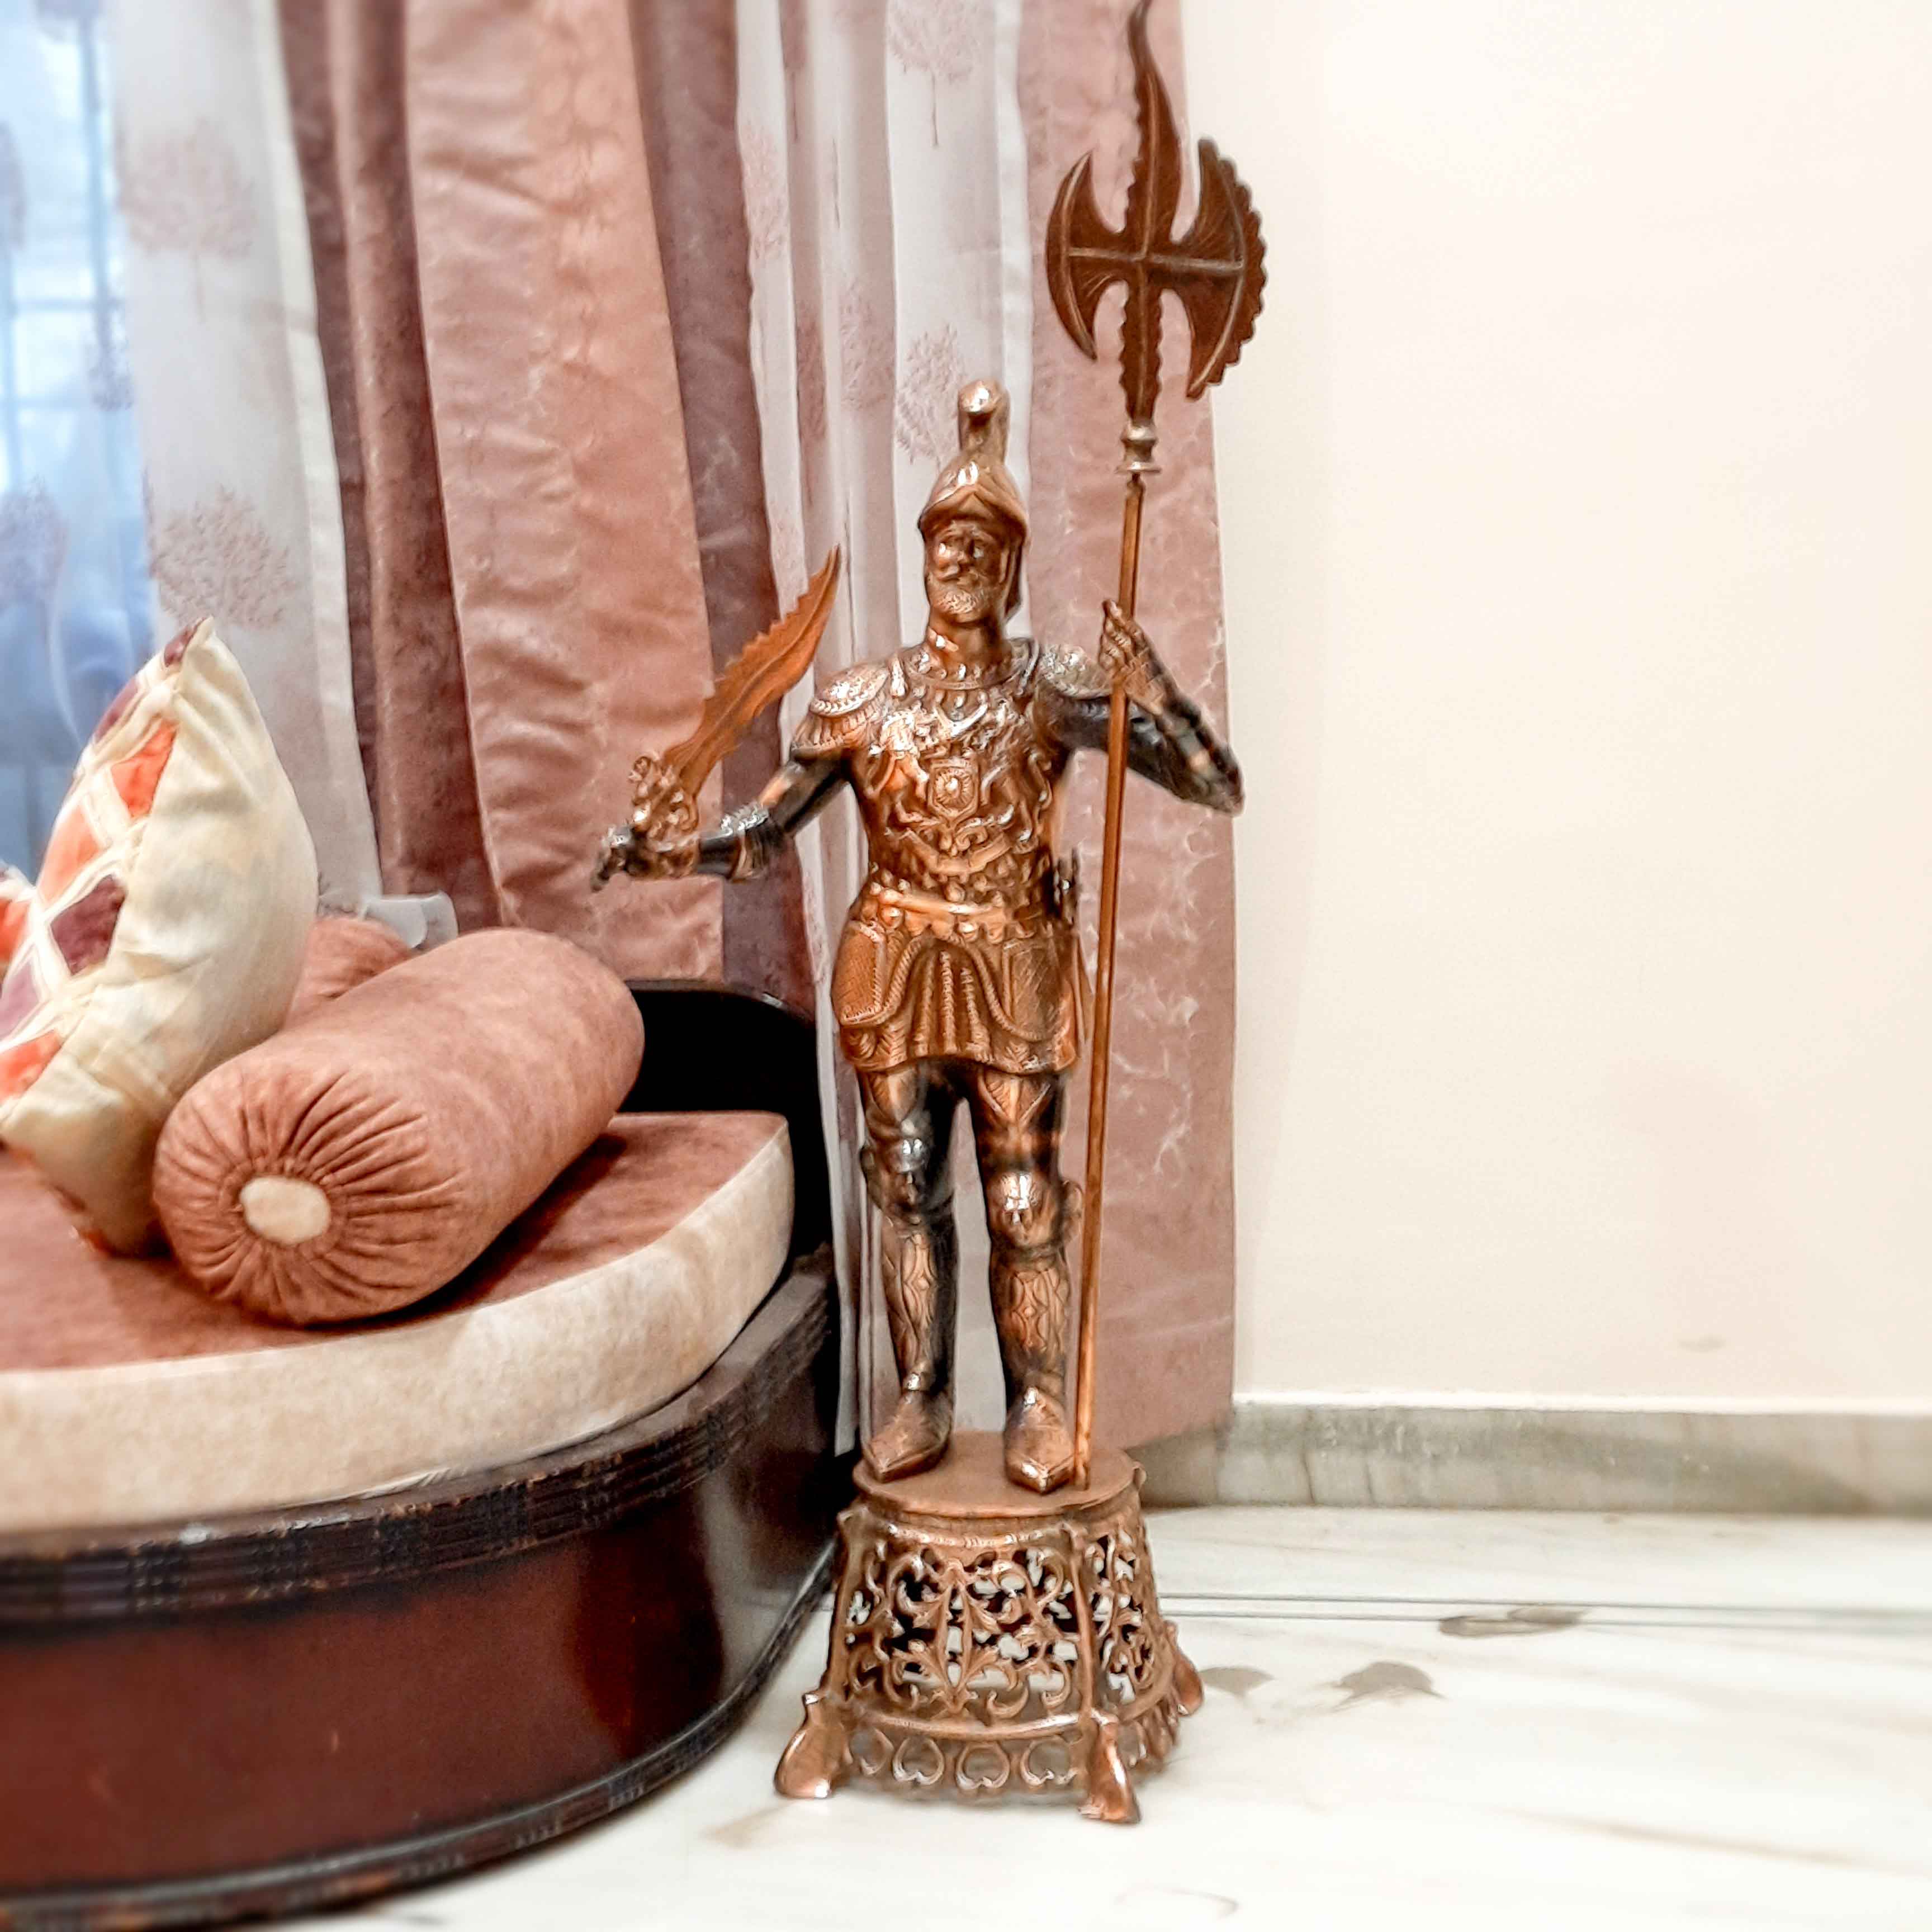 Soldier Showpiece | Warrior Statue with Spear & Sword - For Living Room, Home Decor & Gifts - 46 Inch - Apkamart